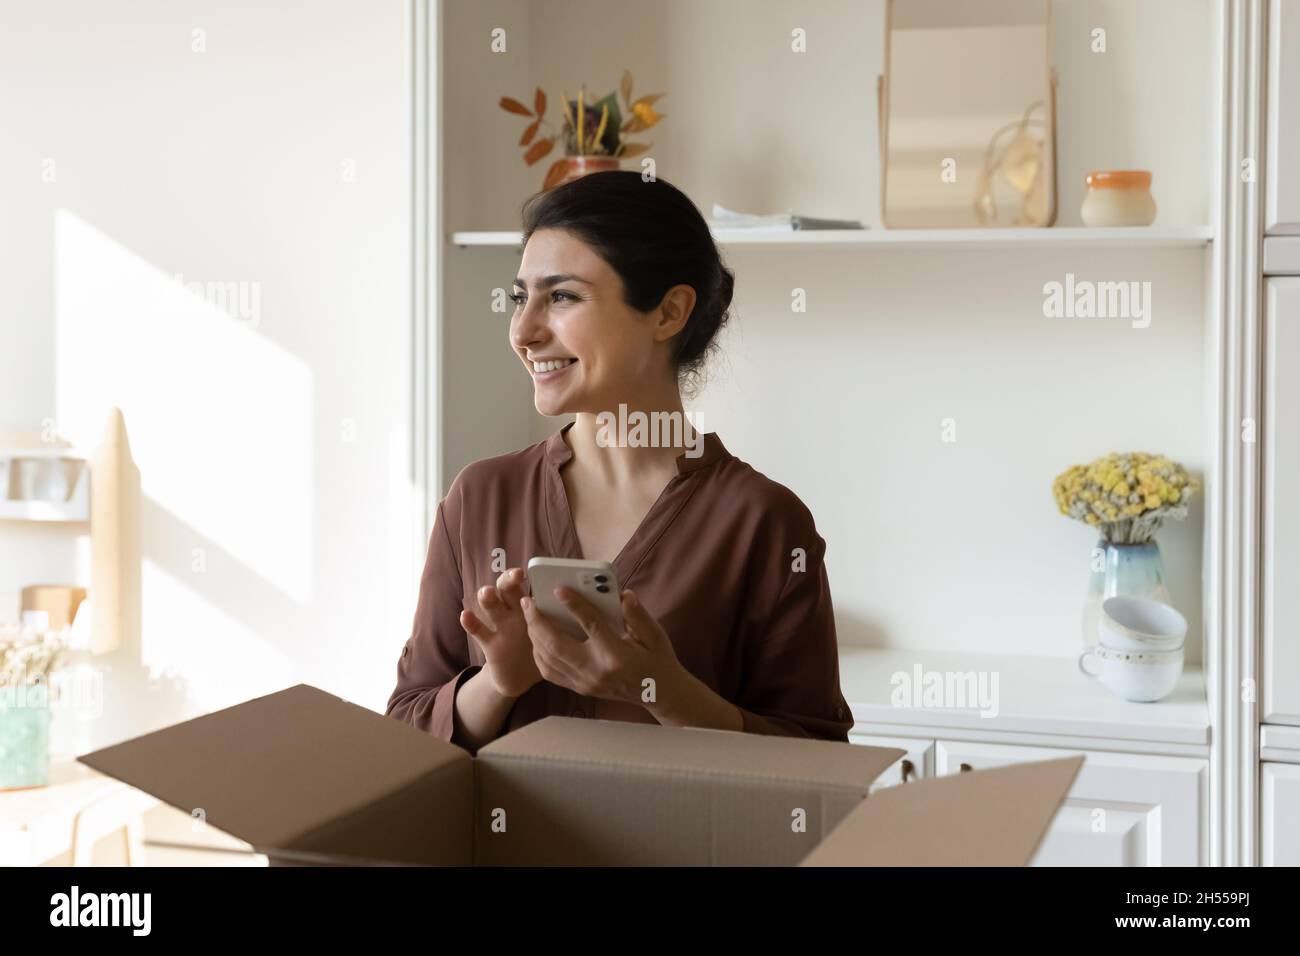 Indian client of ecommerce holds phone looks aside feels satisfied Stock Photo